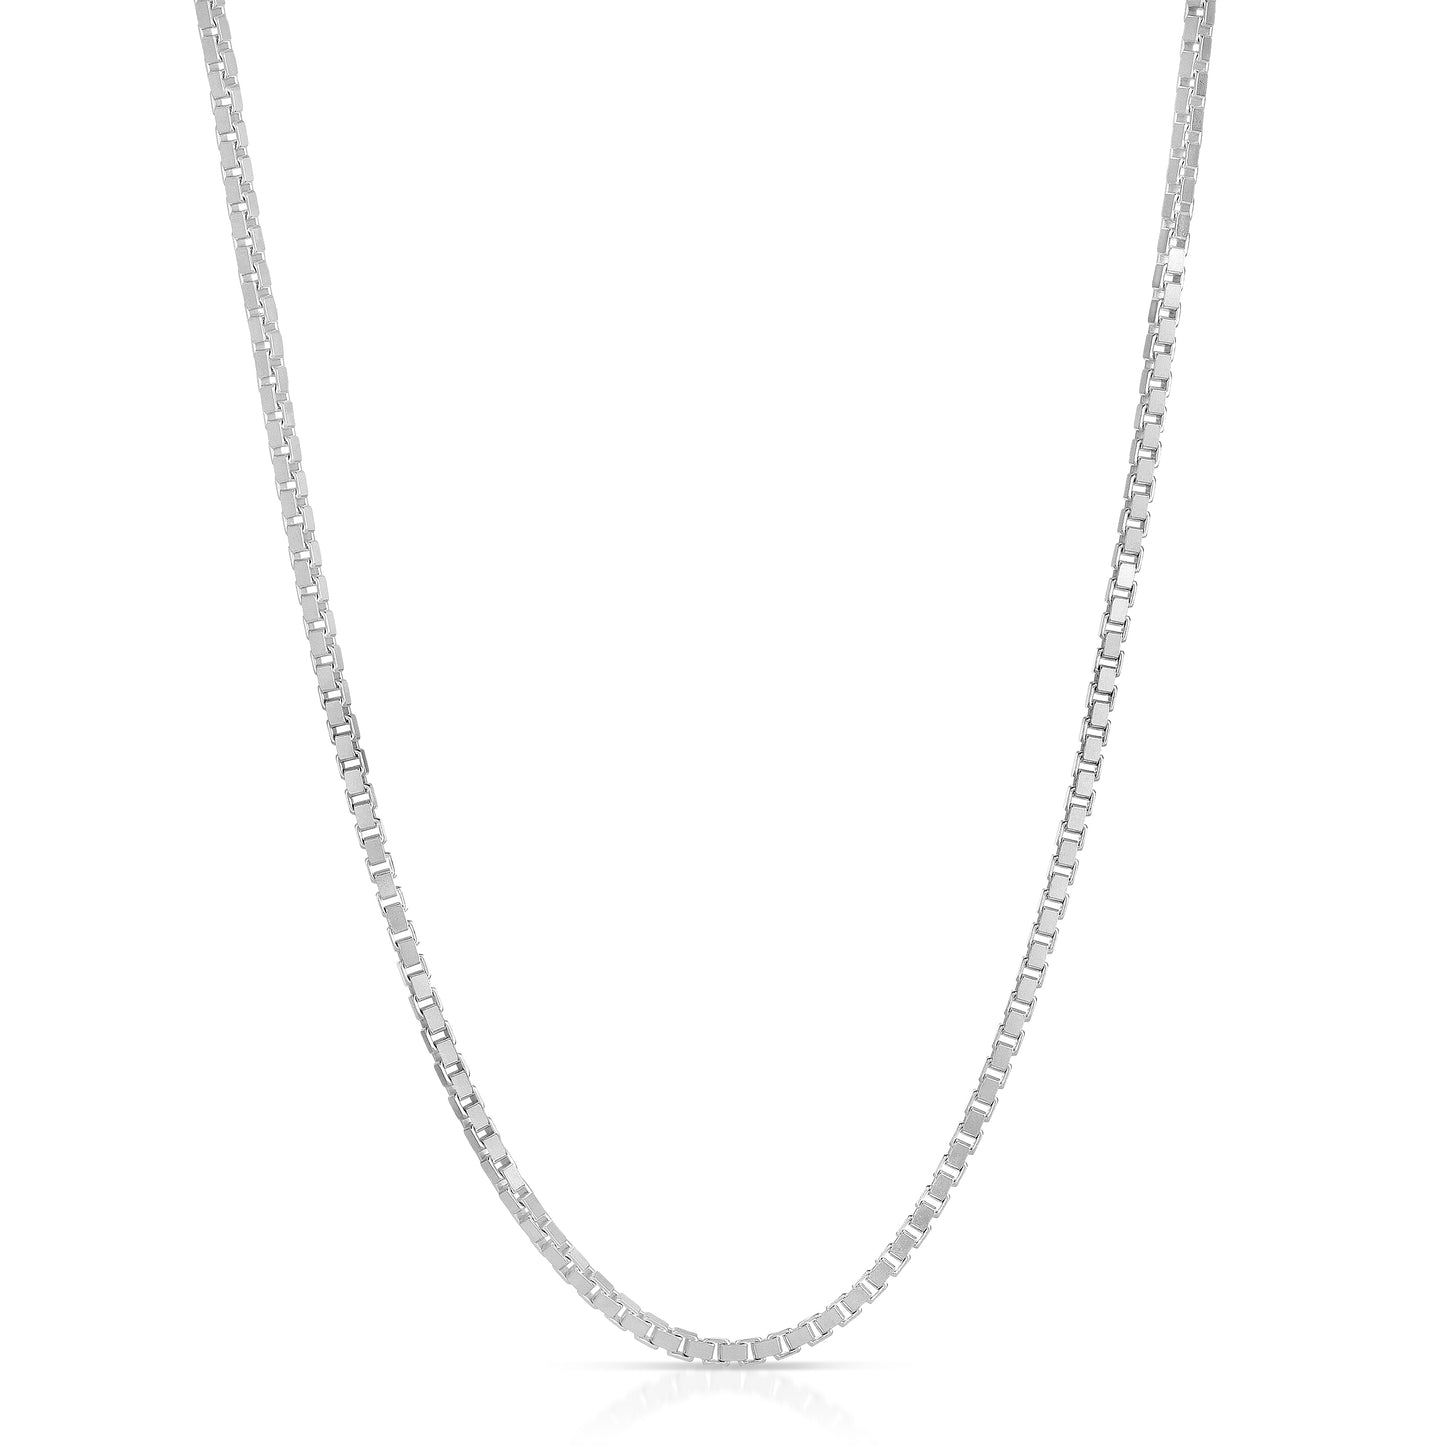 2mm sterling silver box chain necklace